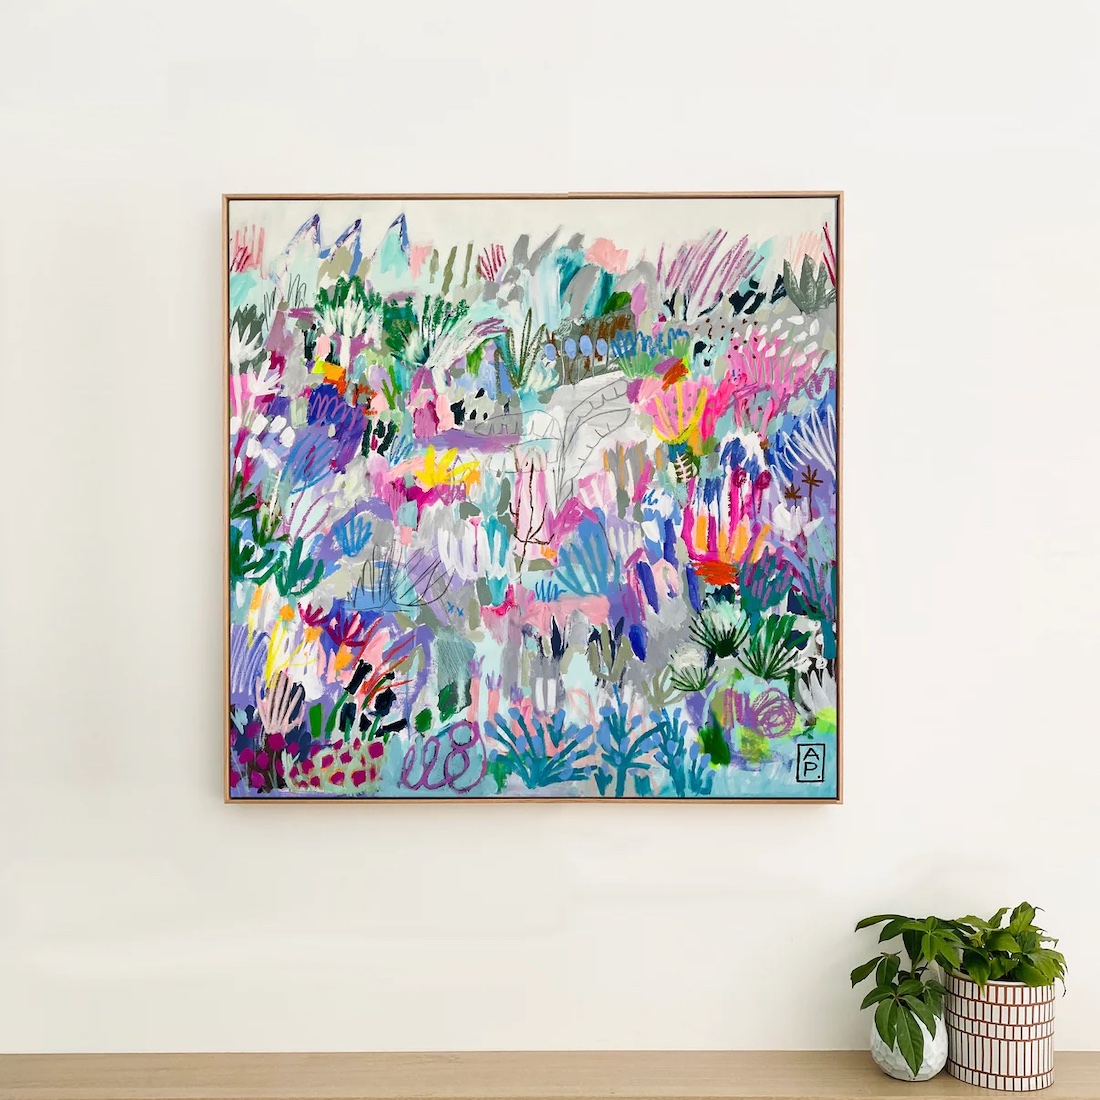 Colourful rainbow abstract artwork called Wildflower Two by Anna Price